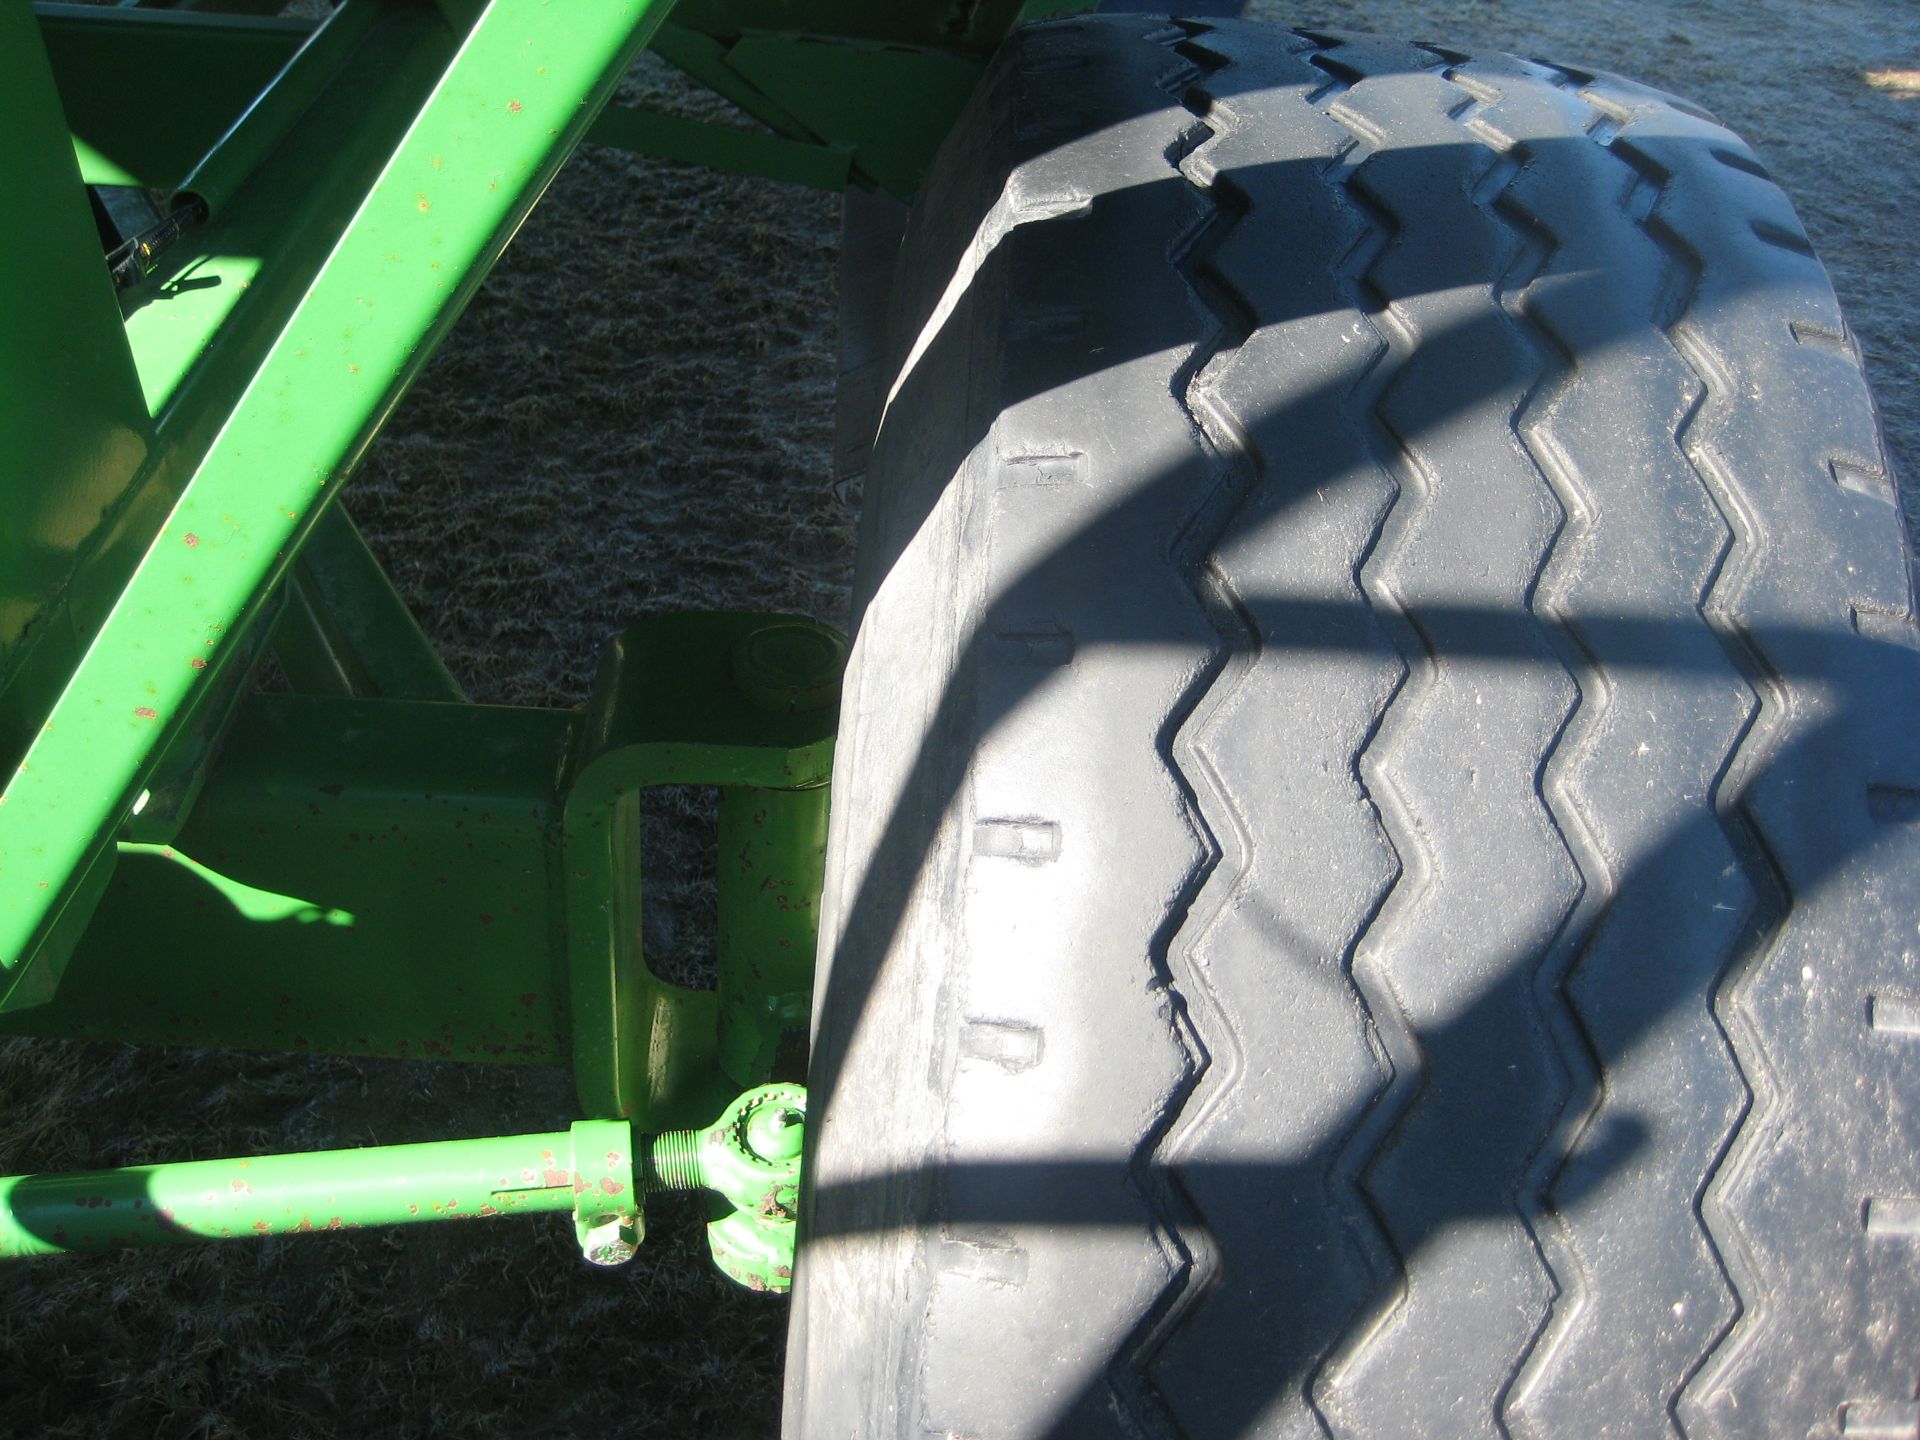 Brent 540 Gravity Wagon, 425-65R/22.5 tires, green - Image 8 of 15